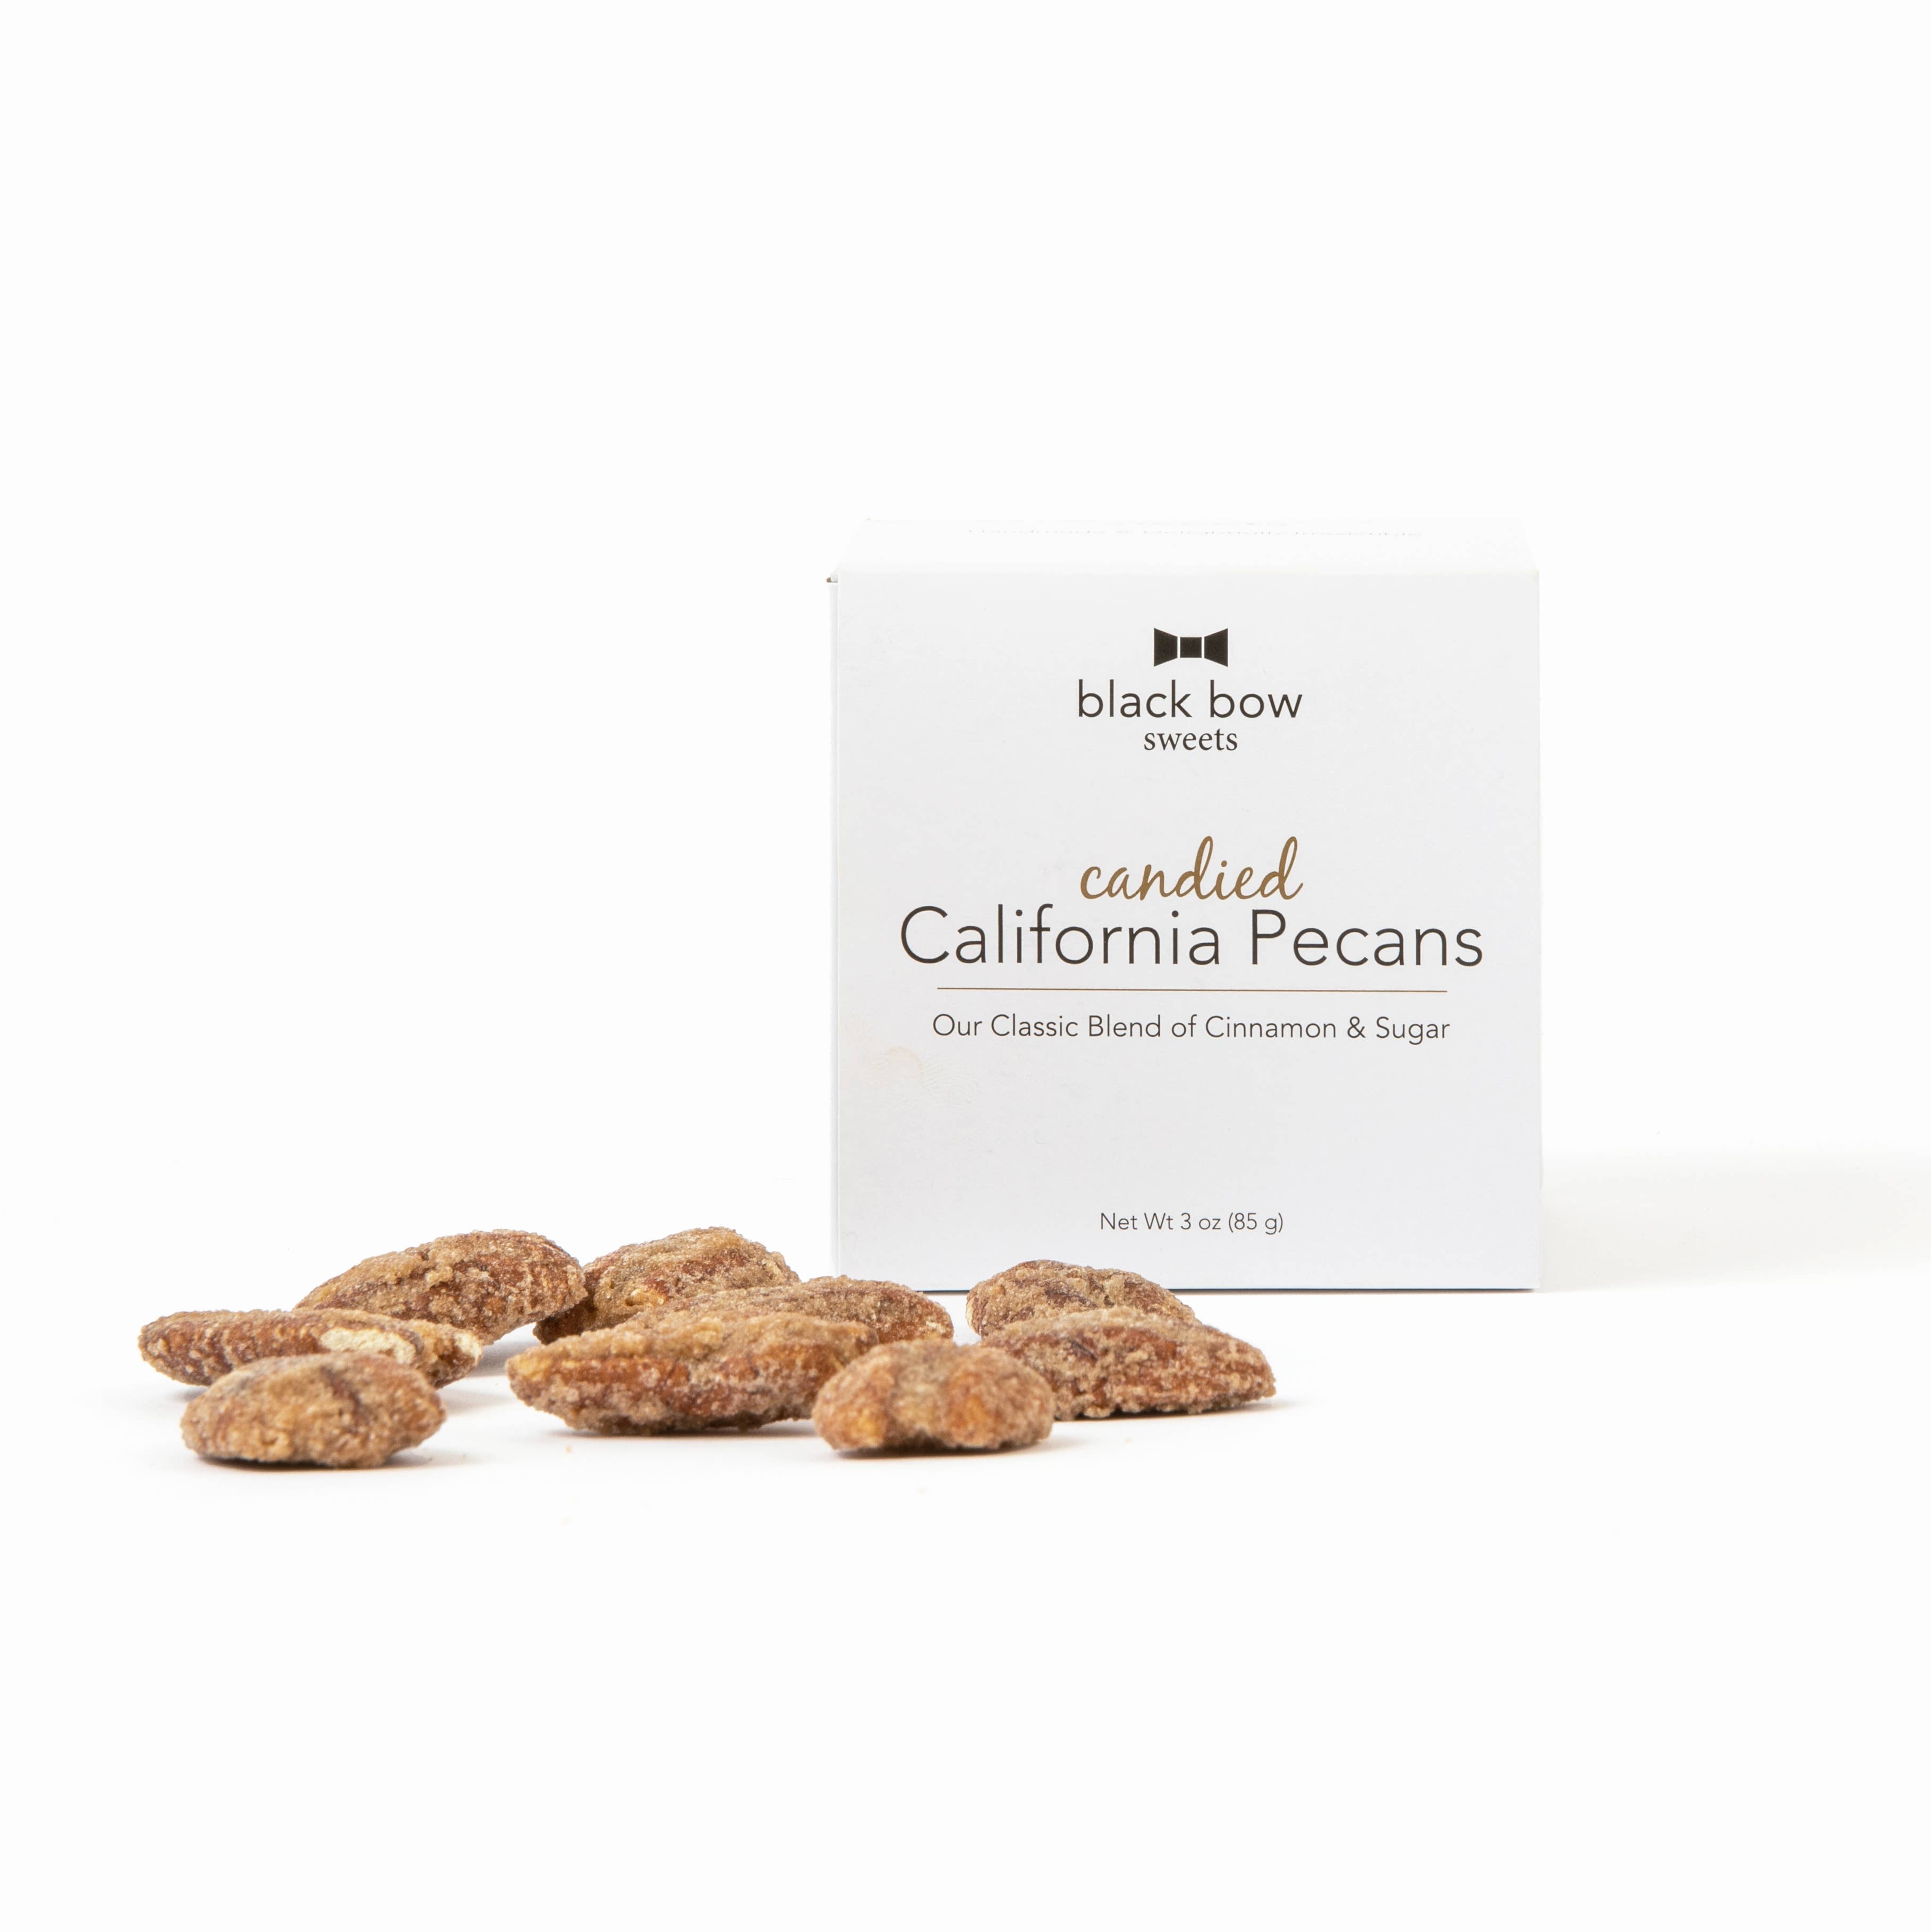 Candied California Pecans